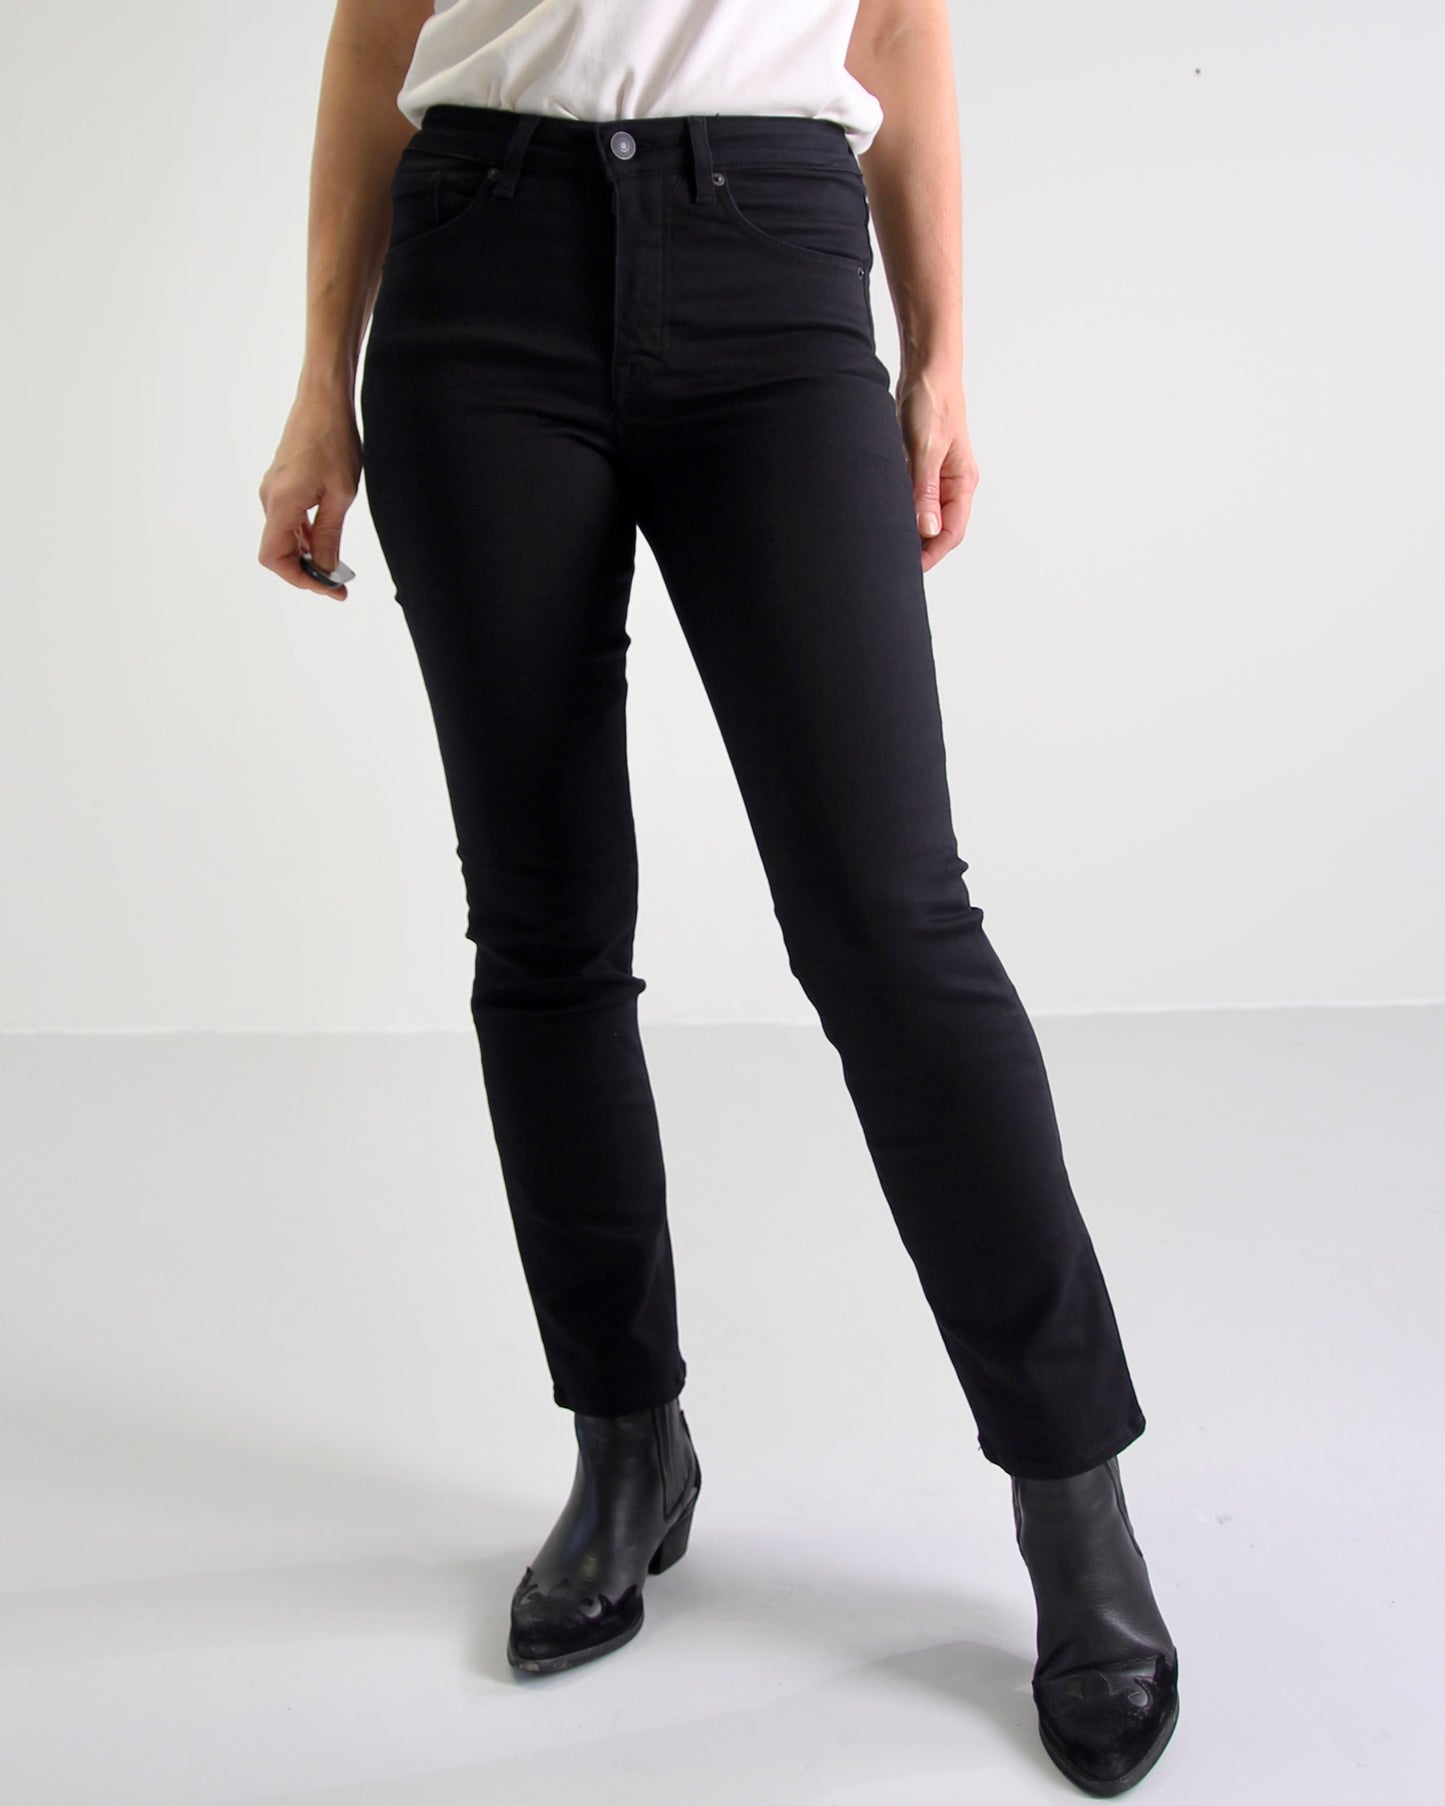 Ellery Black Jeans - Dame - Tailored  - High waist - Stretchy